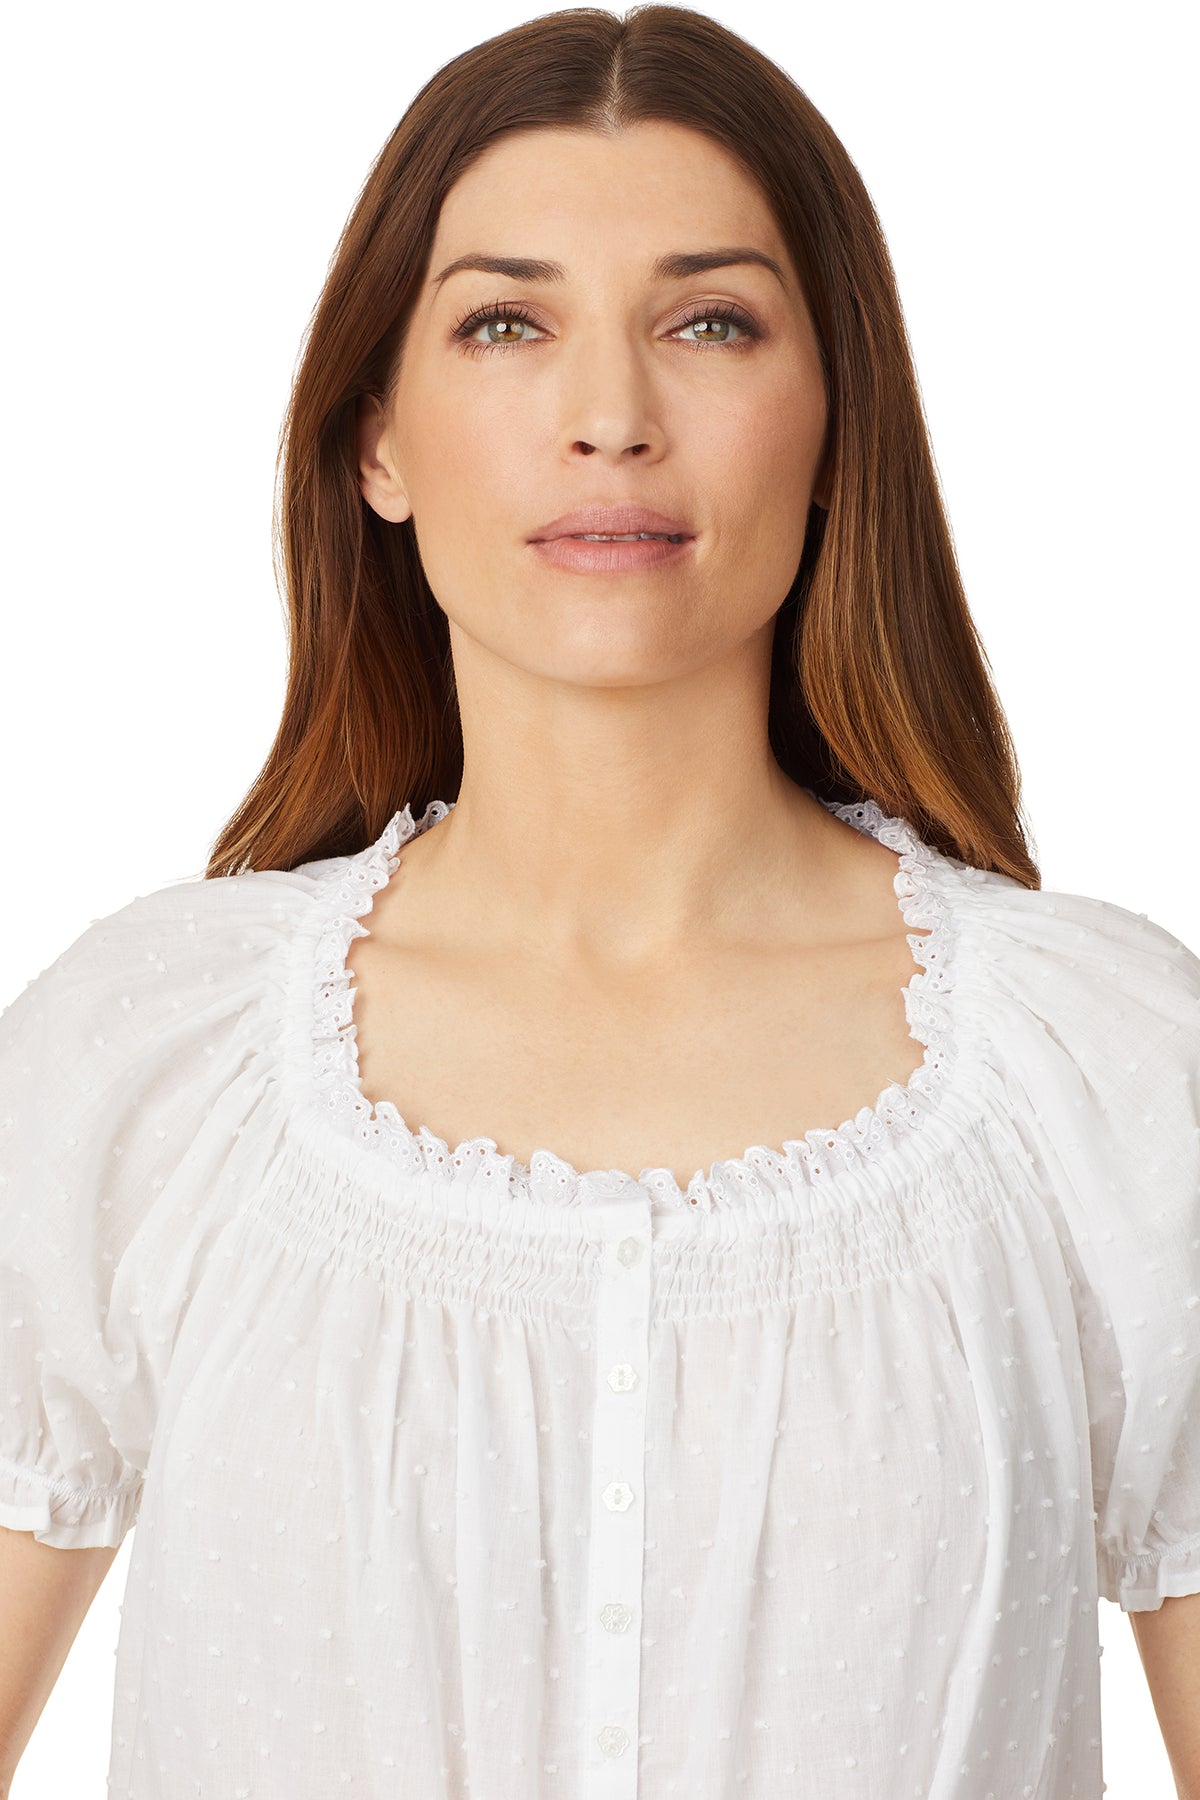 Upper part of a lady wearing a white cap sleeve short nightdress with white dot pattern.